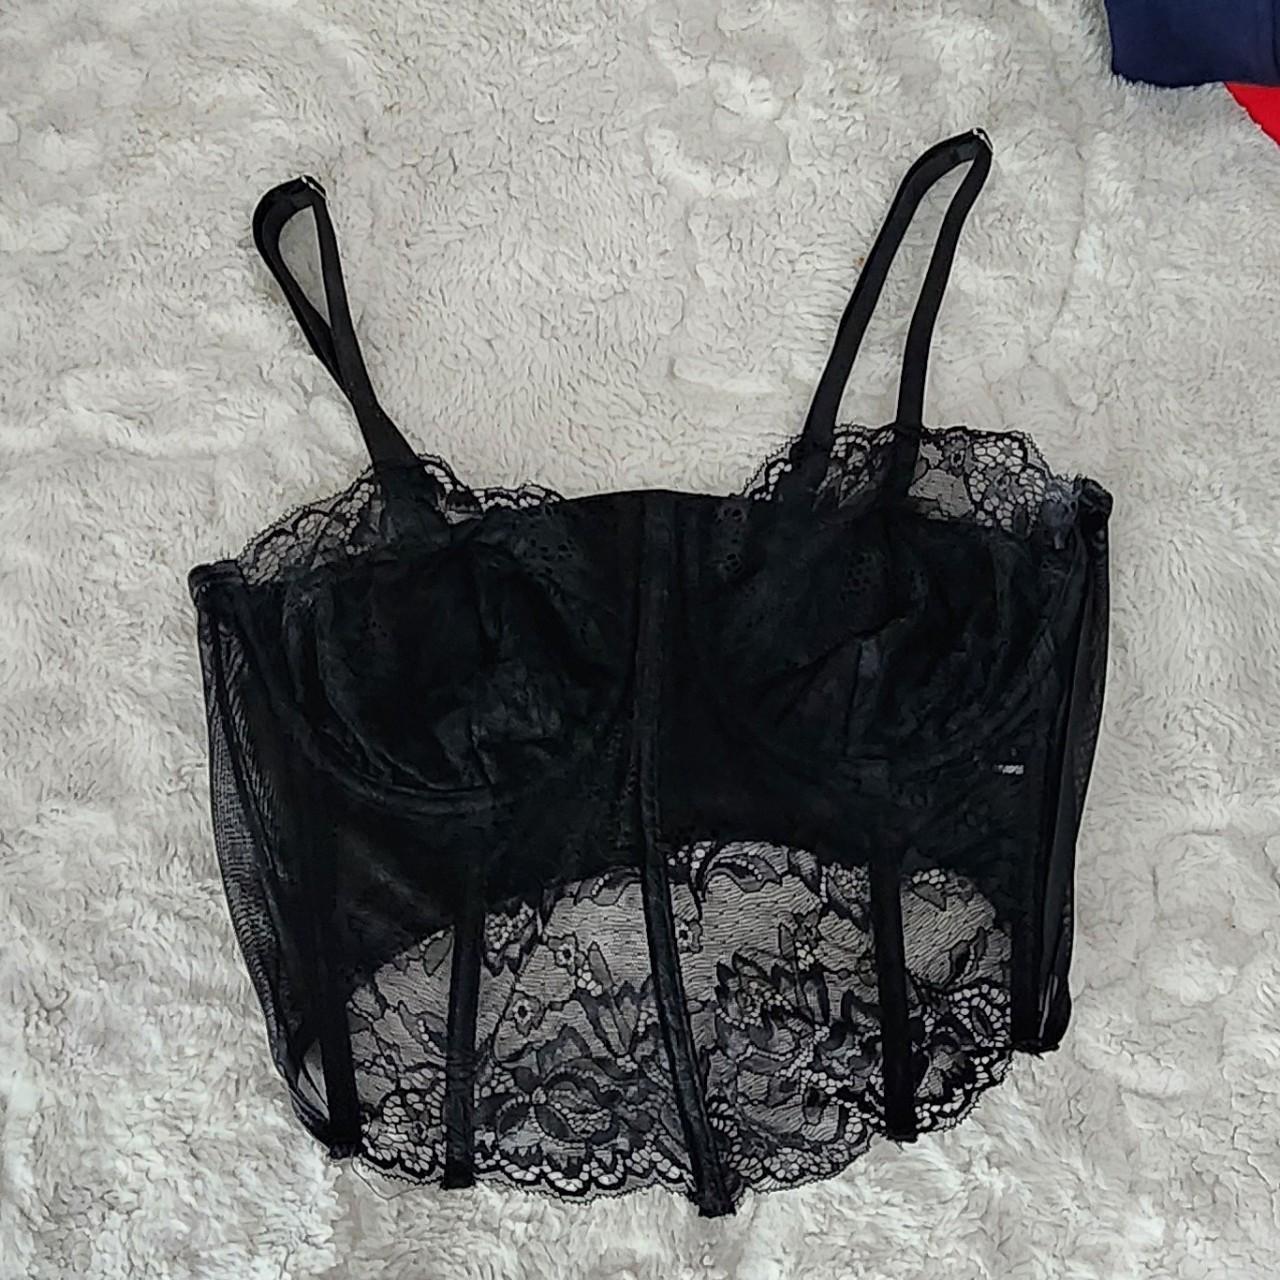 BLACK CORSET SEXY PUSH-UP BRA WIRED GOING OUT - Depop